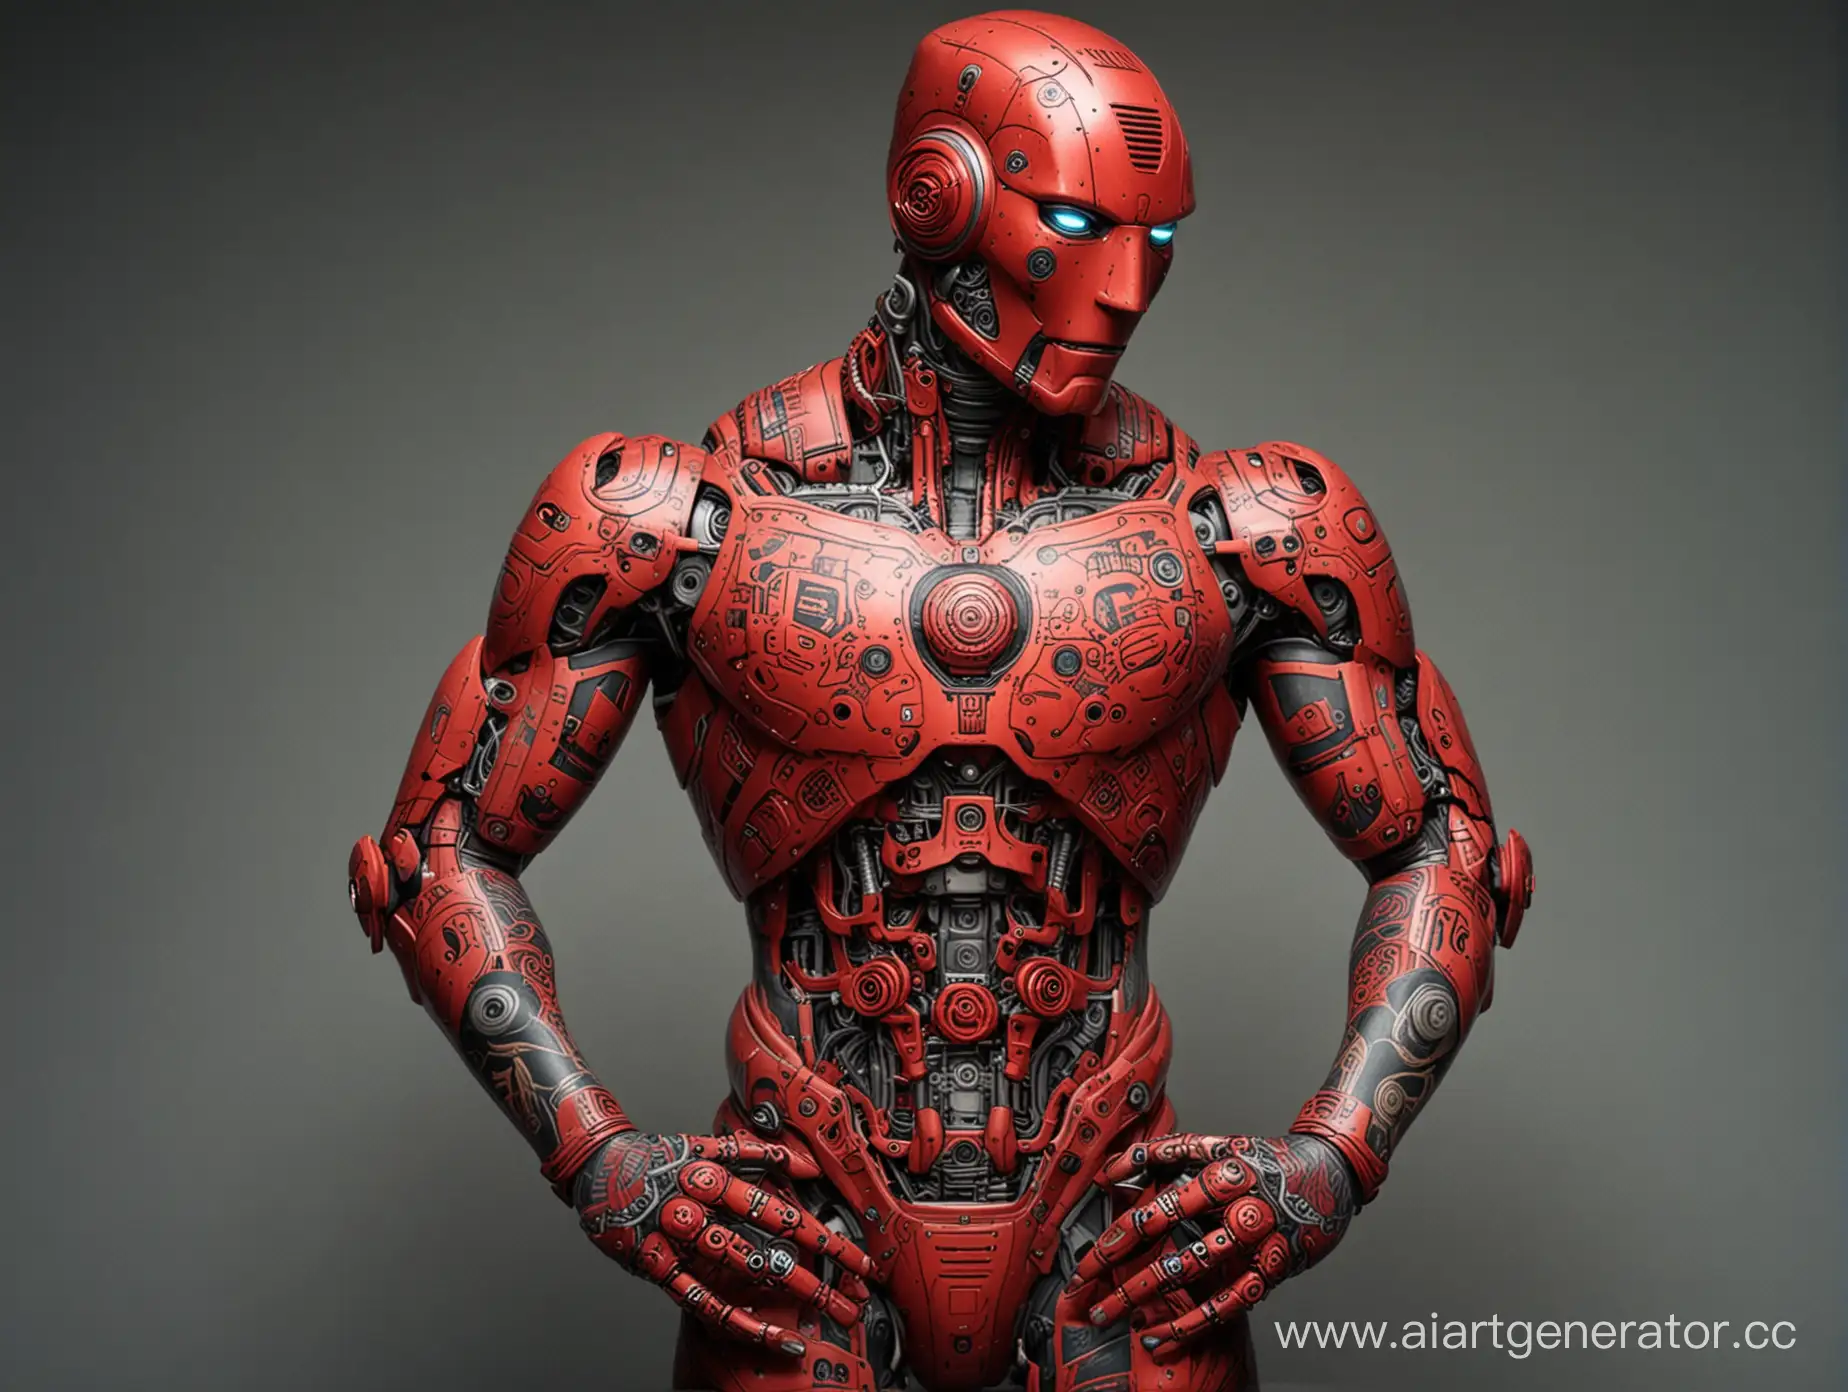 Colorful-Red-Robot-with-Bright-Tattoos